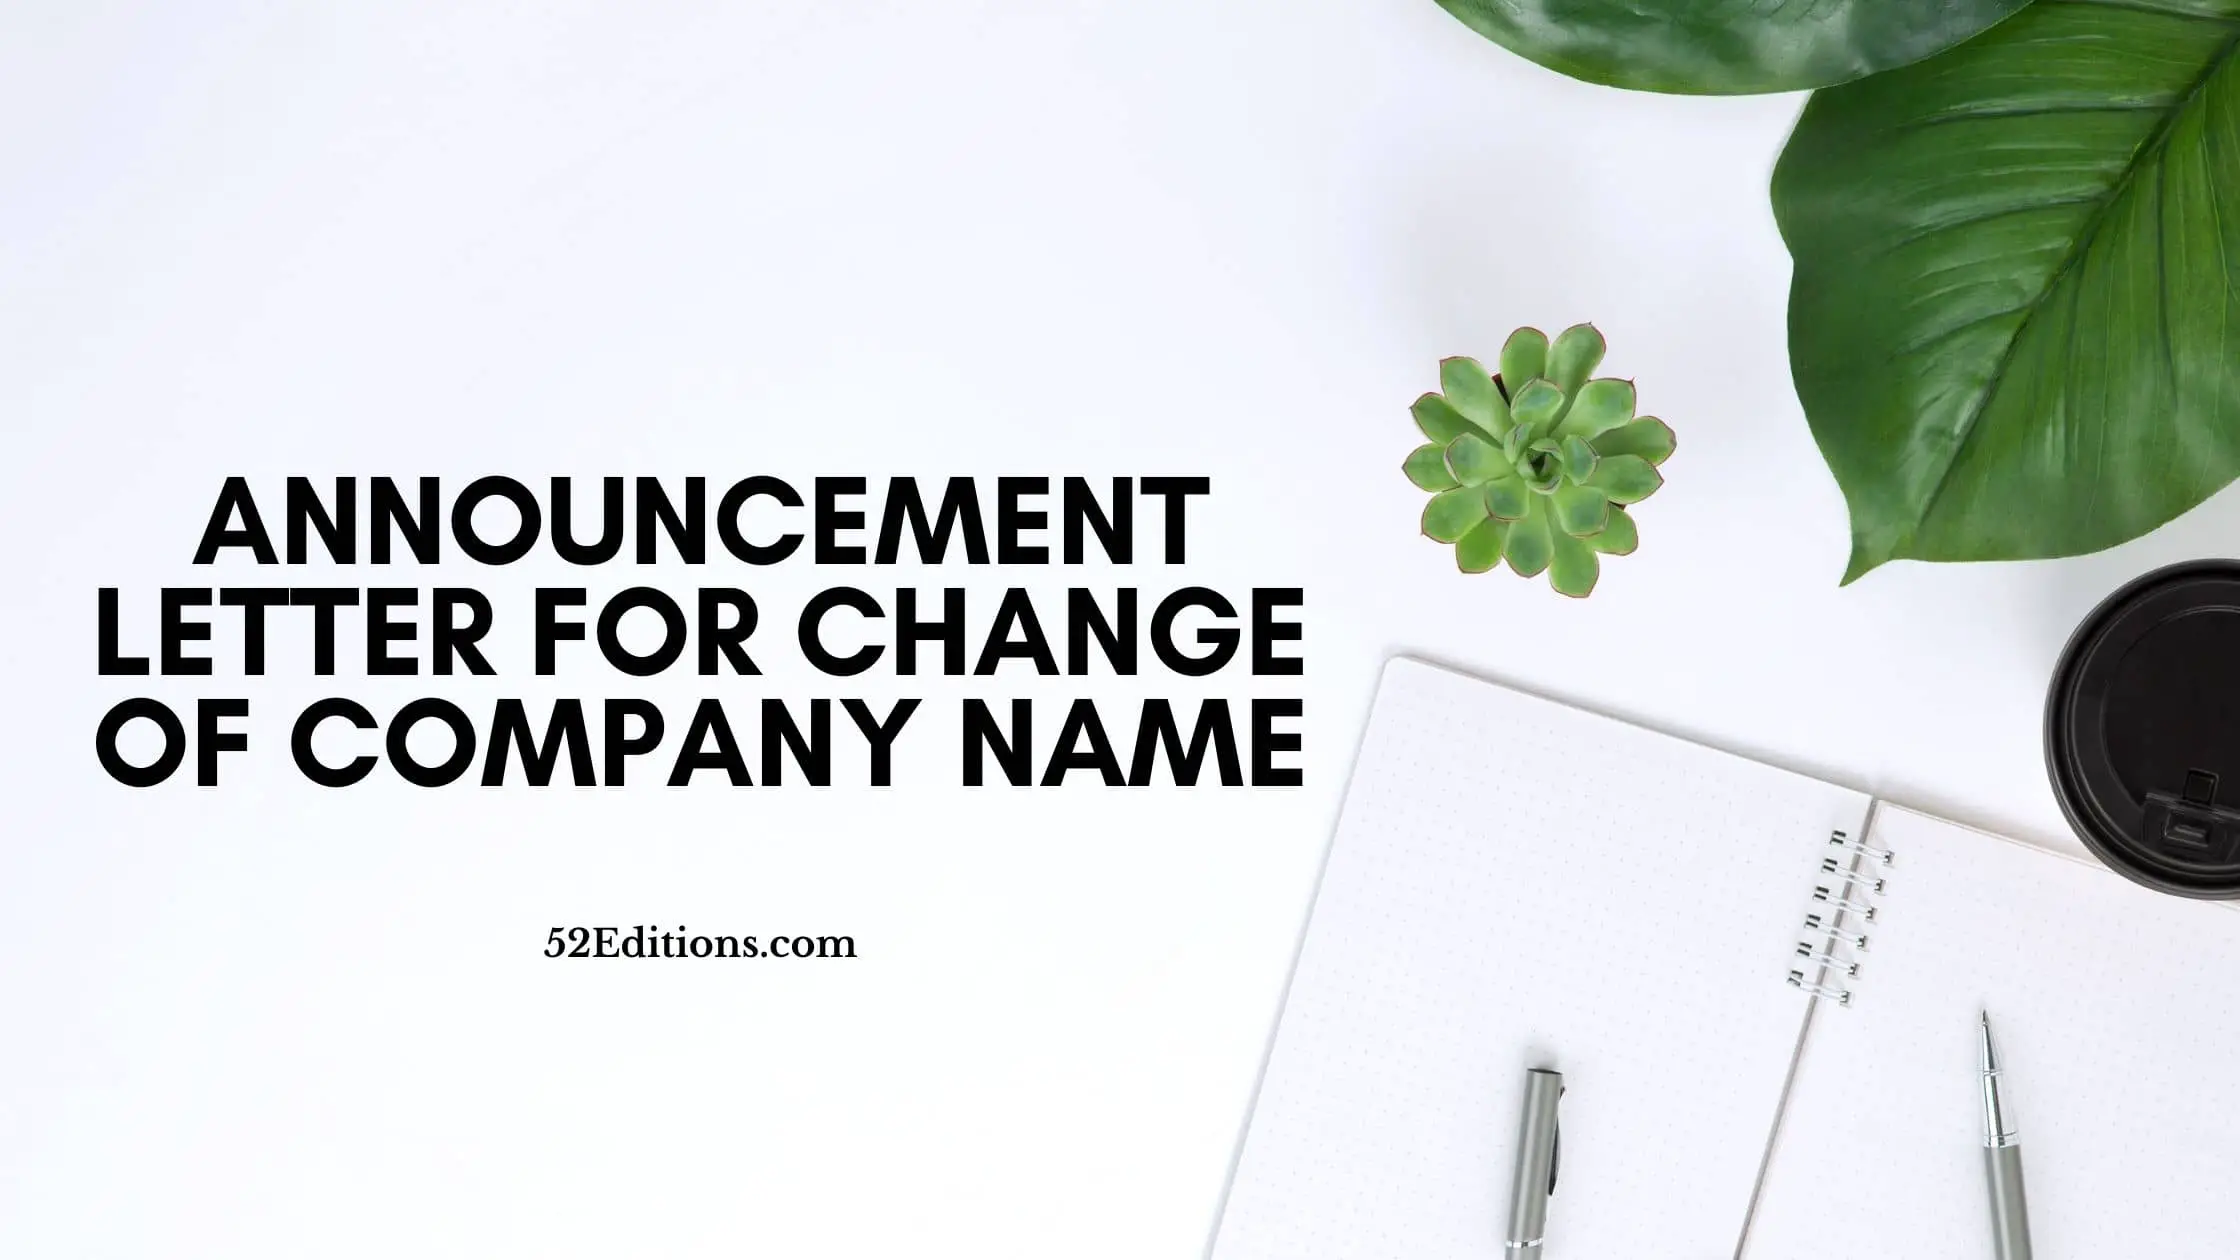 Announcement Letter For Change of Company Name // FREE Letter